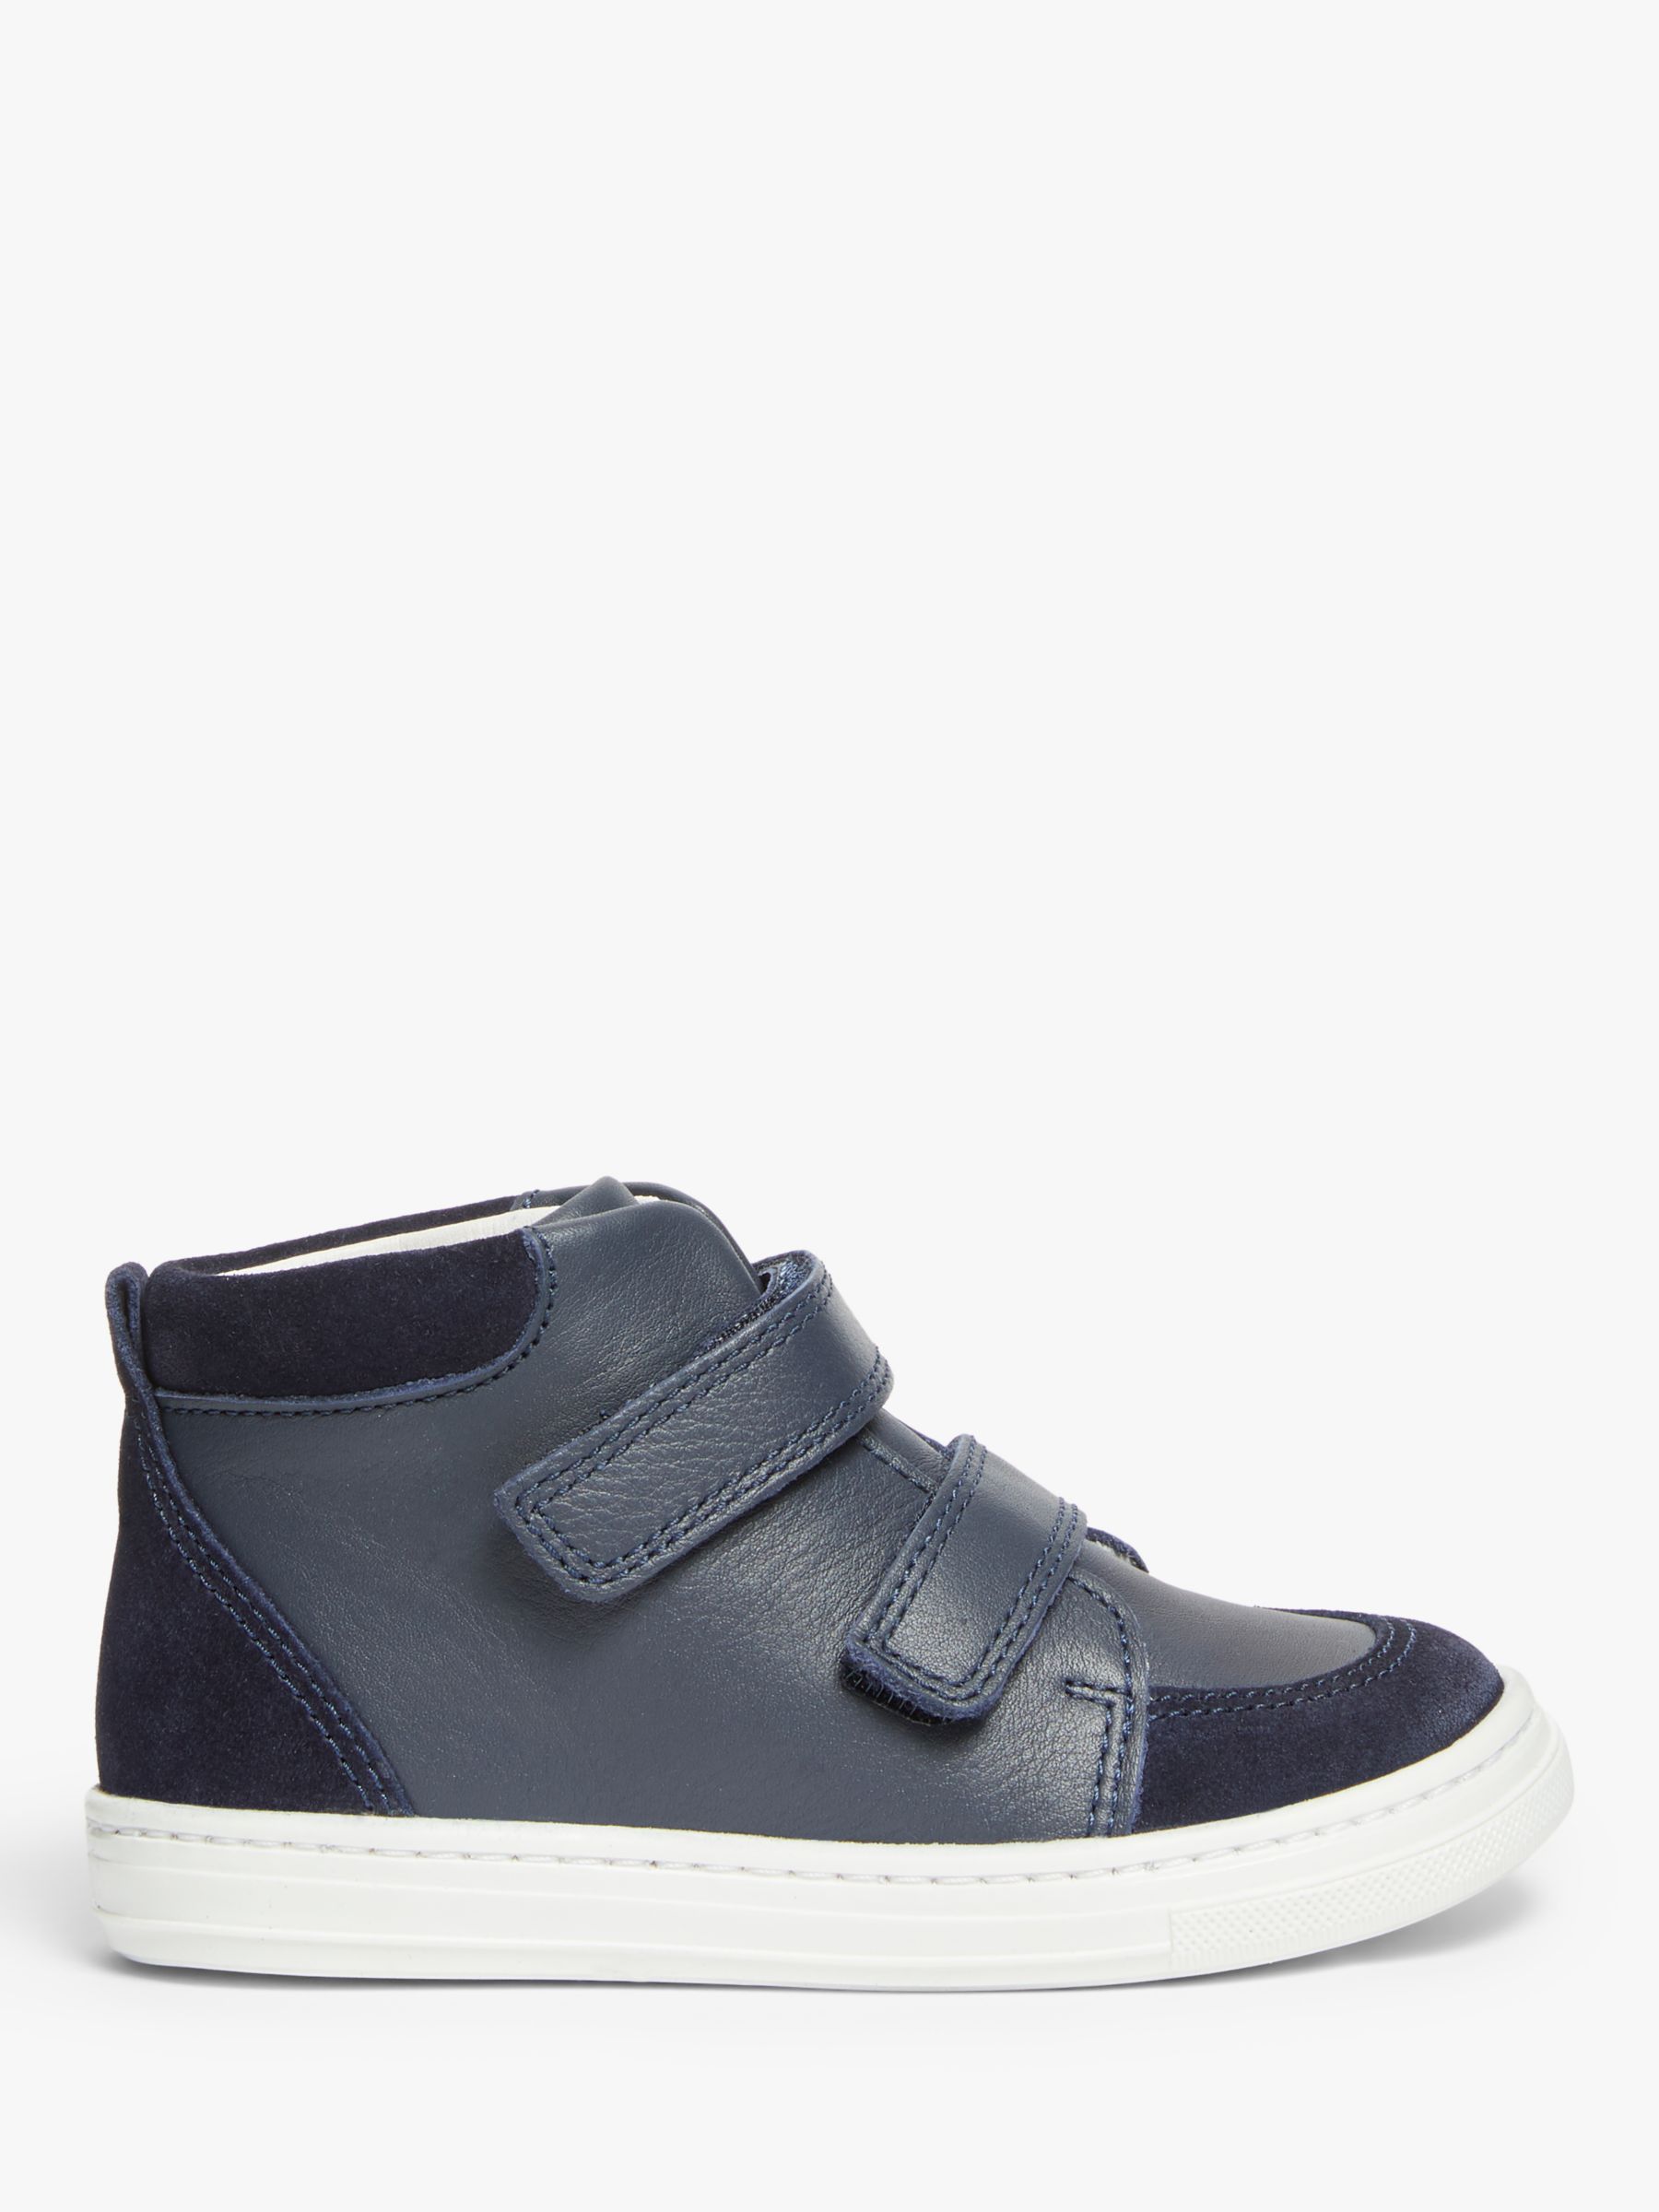 Top Trainers, Navy at John Lewis \u0026 Partners